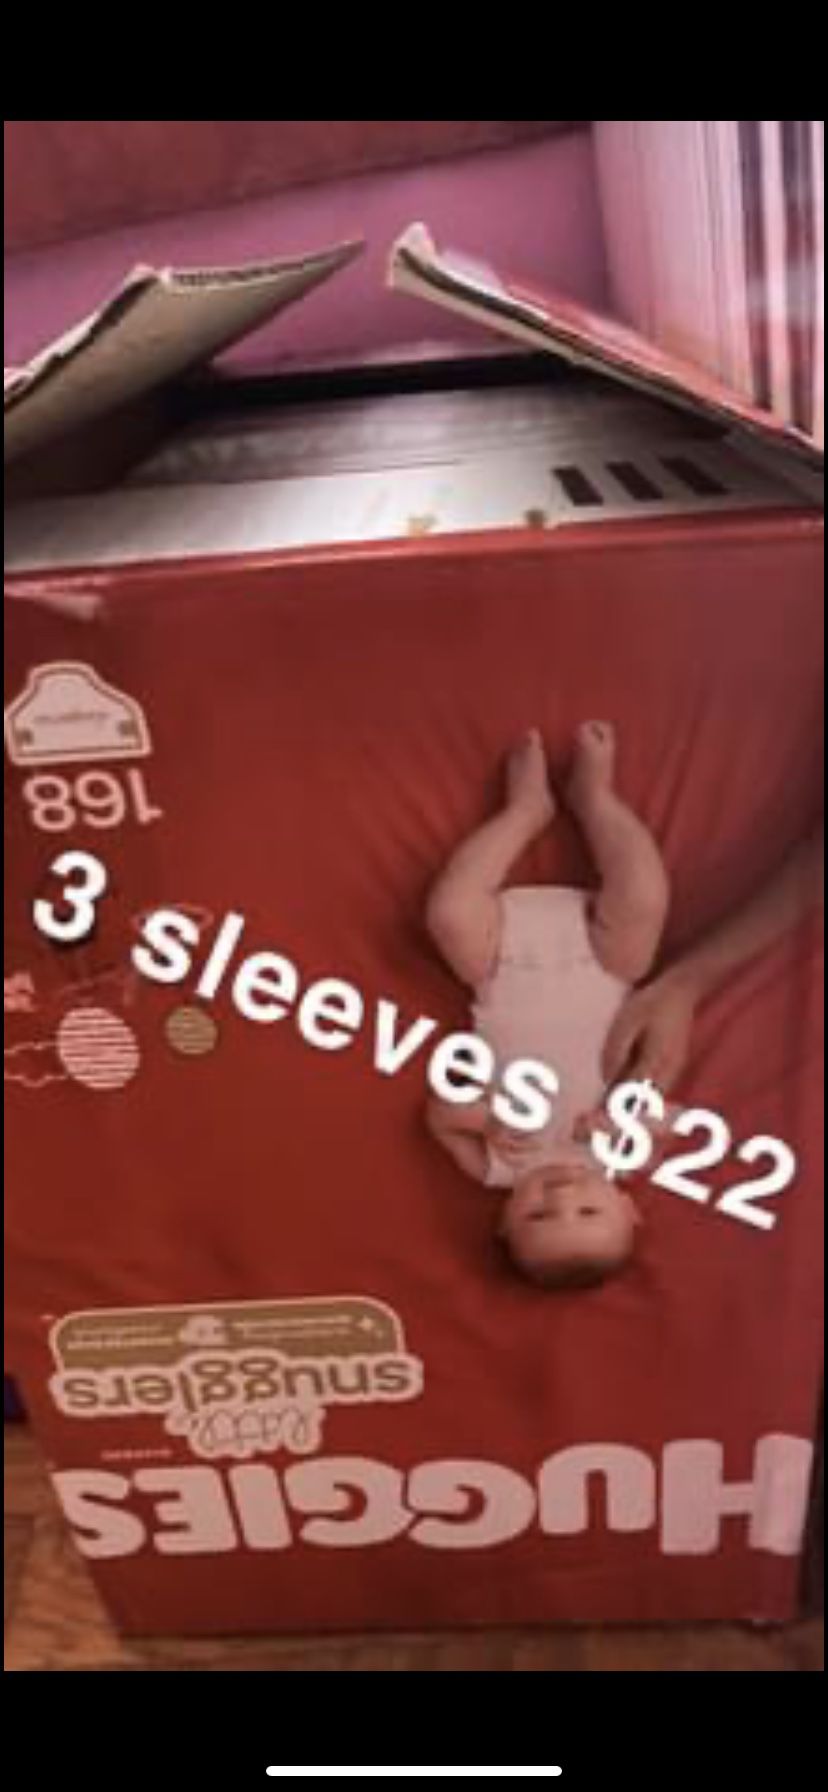 Diapers size 1